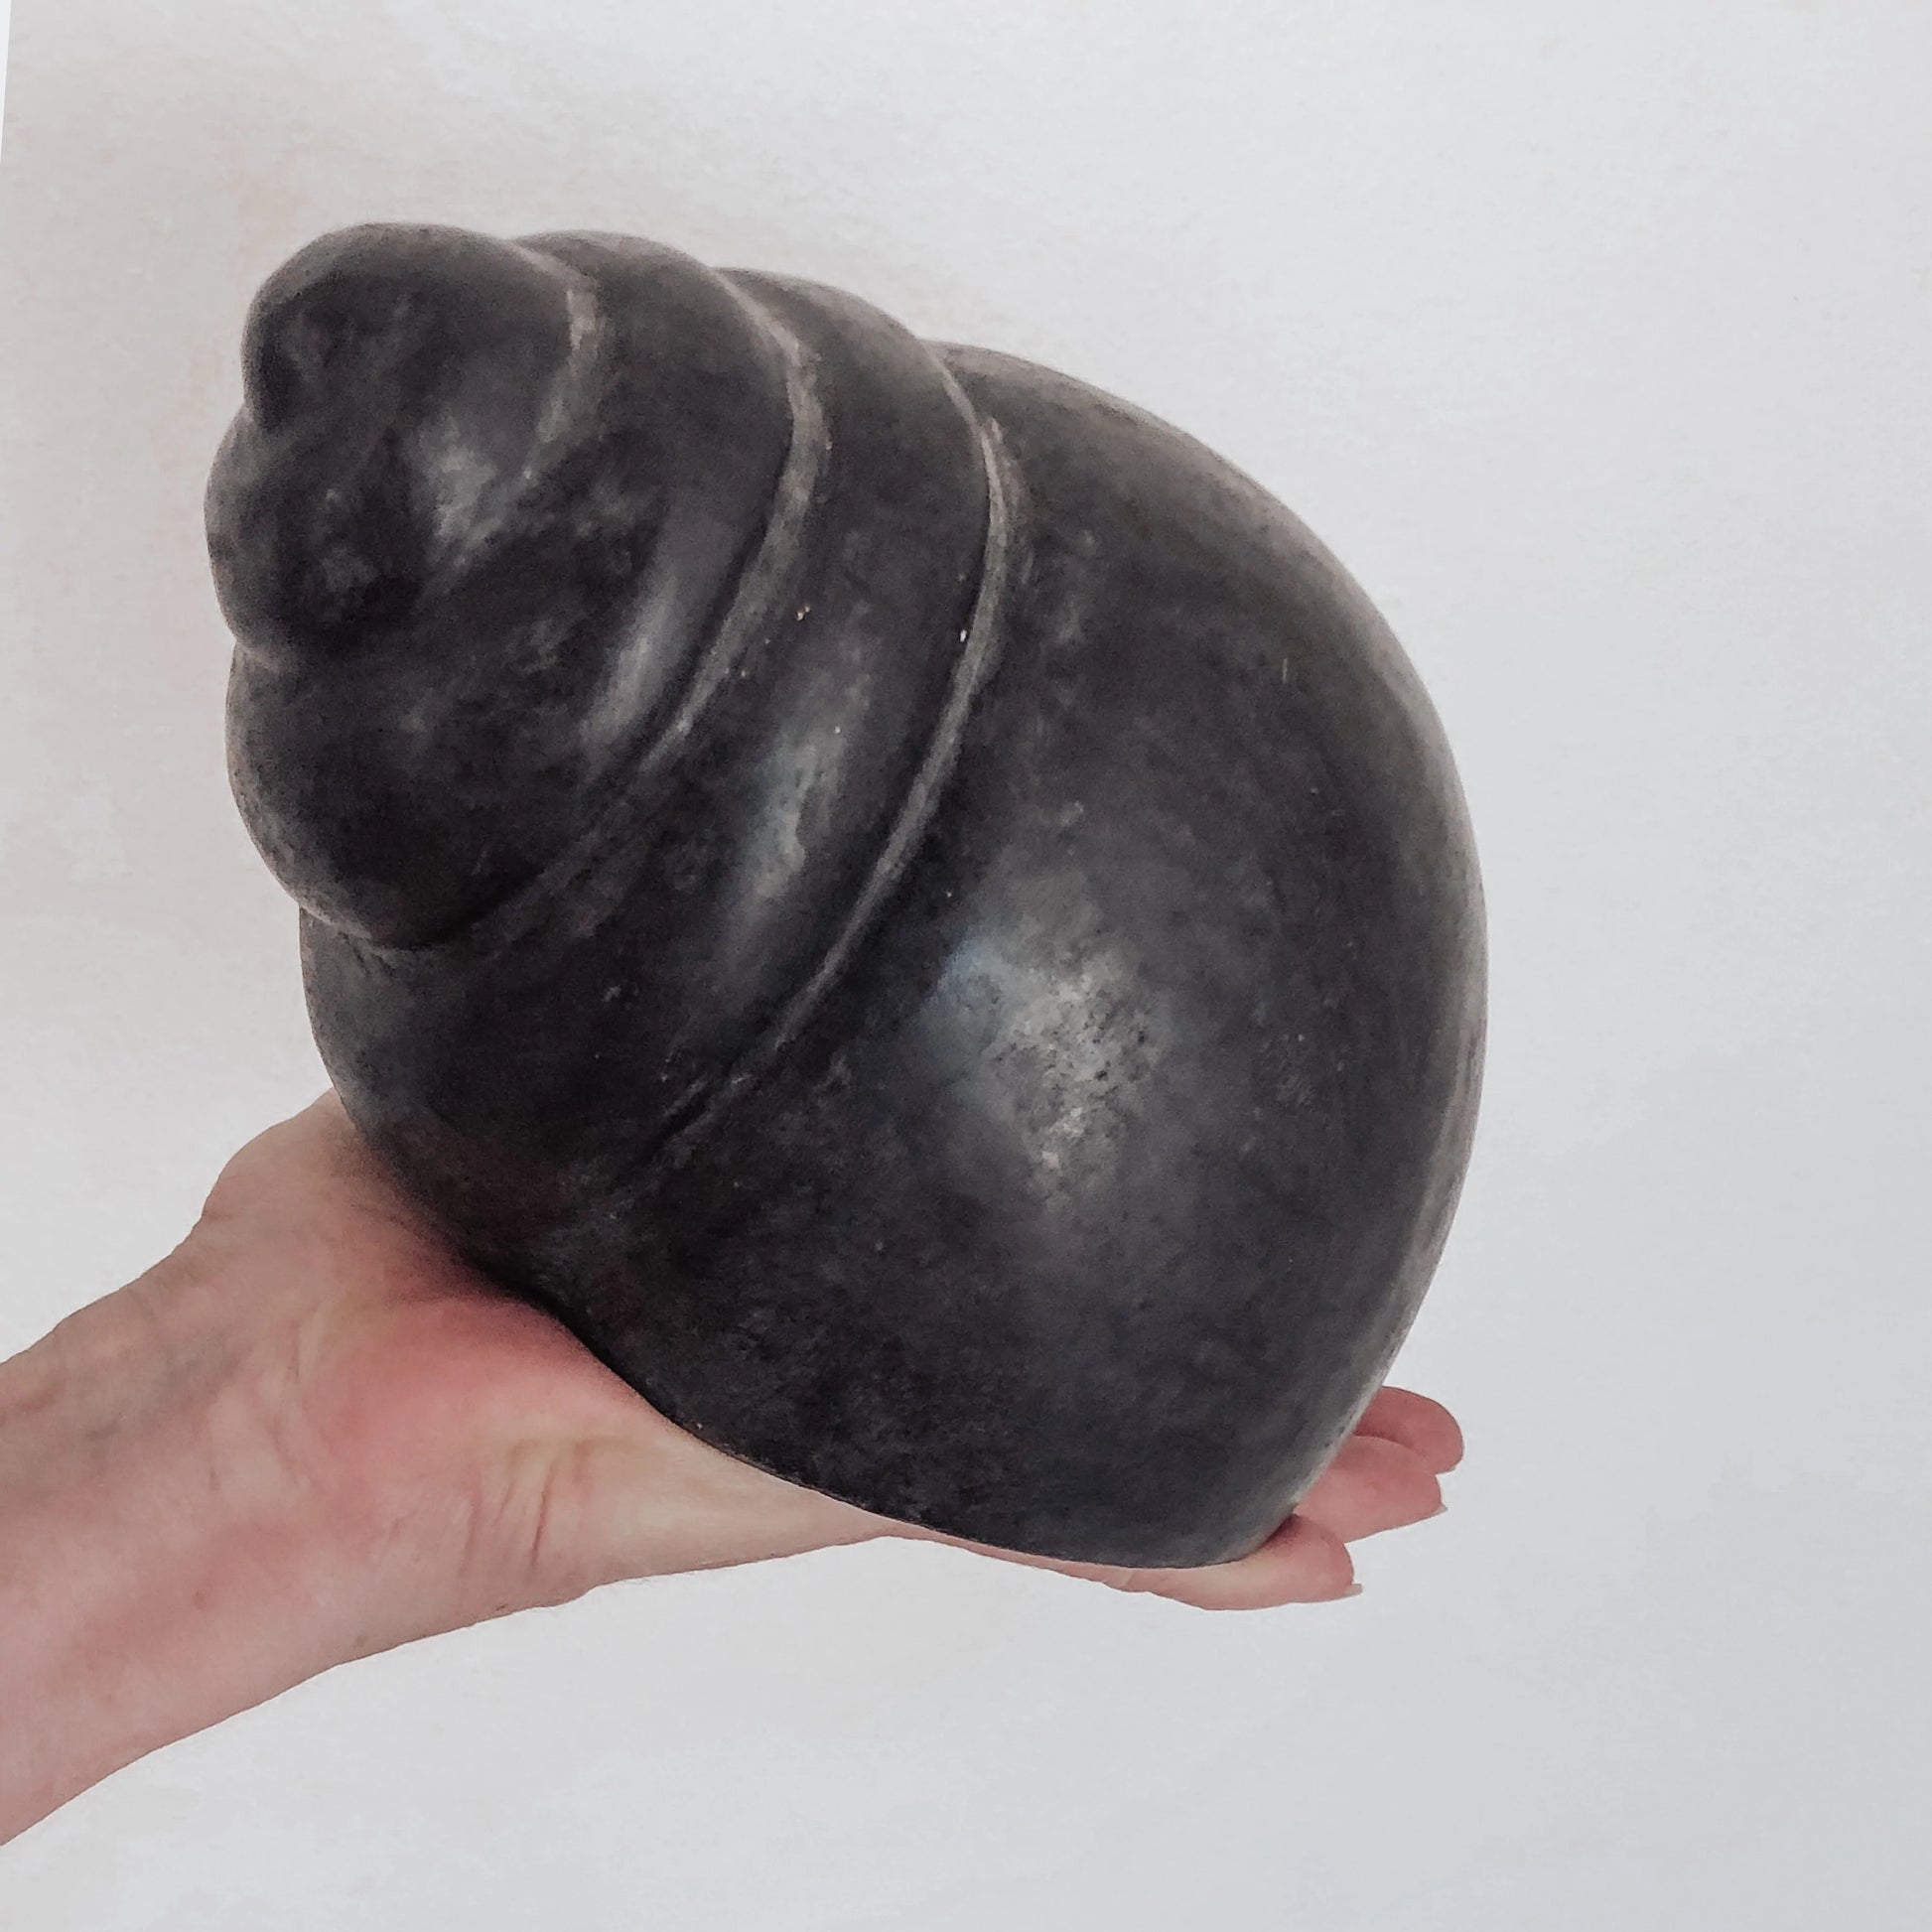 Image of Terra Cruda's River Stone Shell from the Australian homewares collection